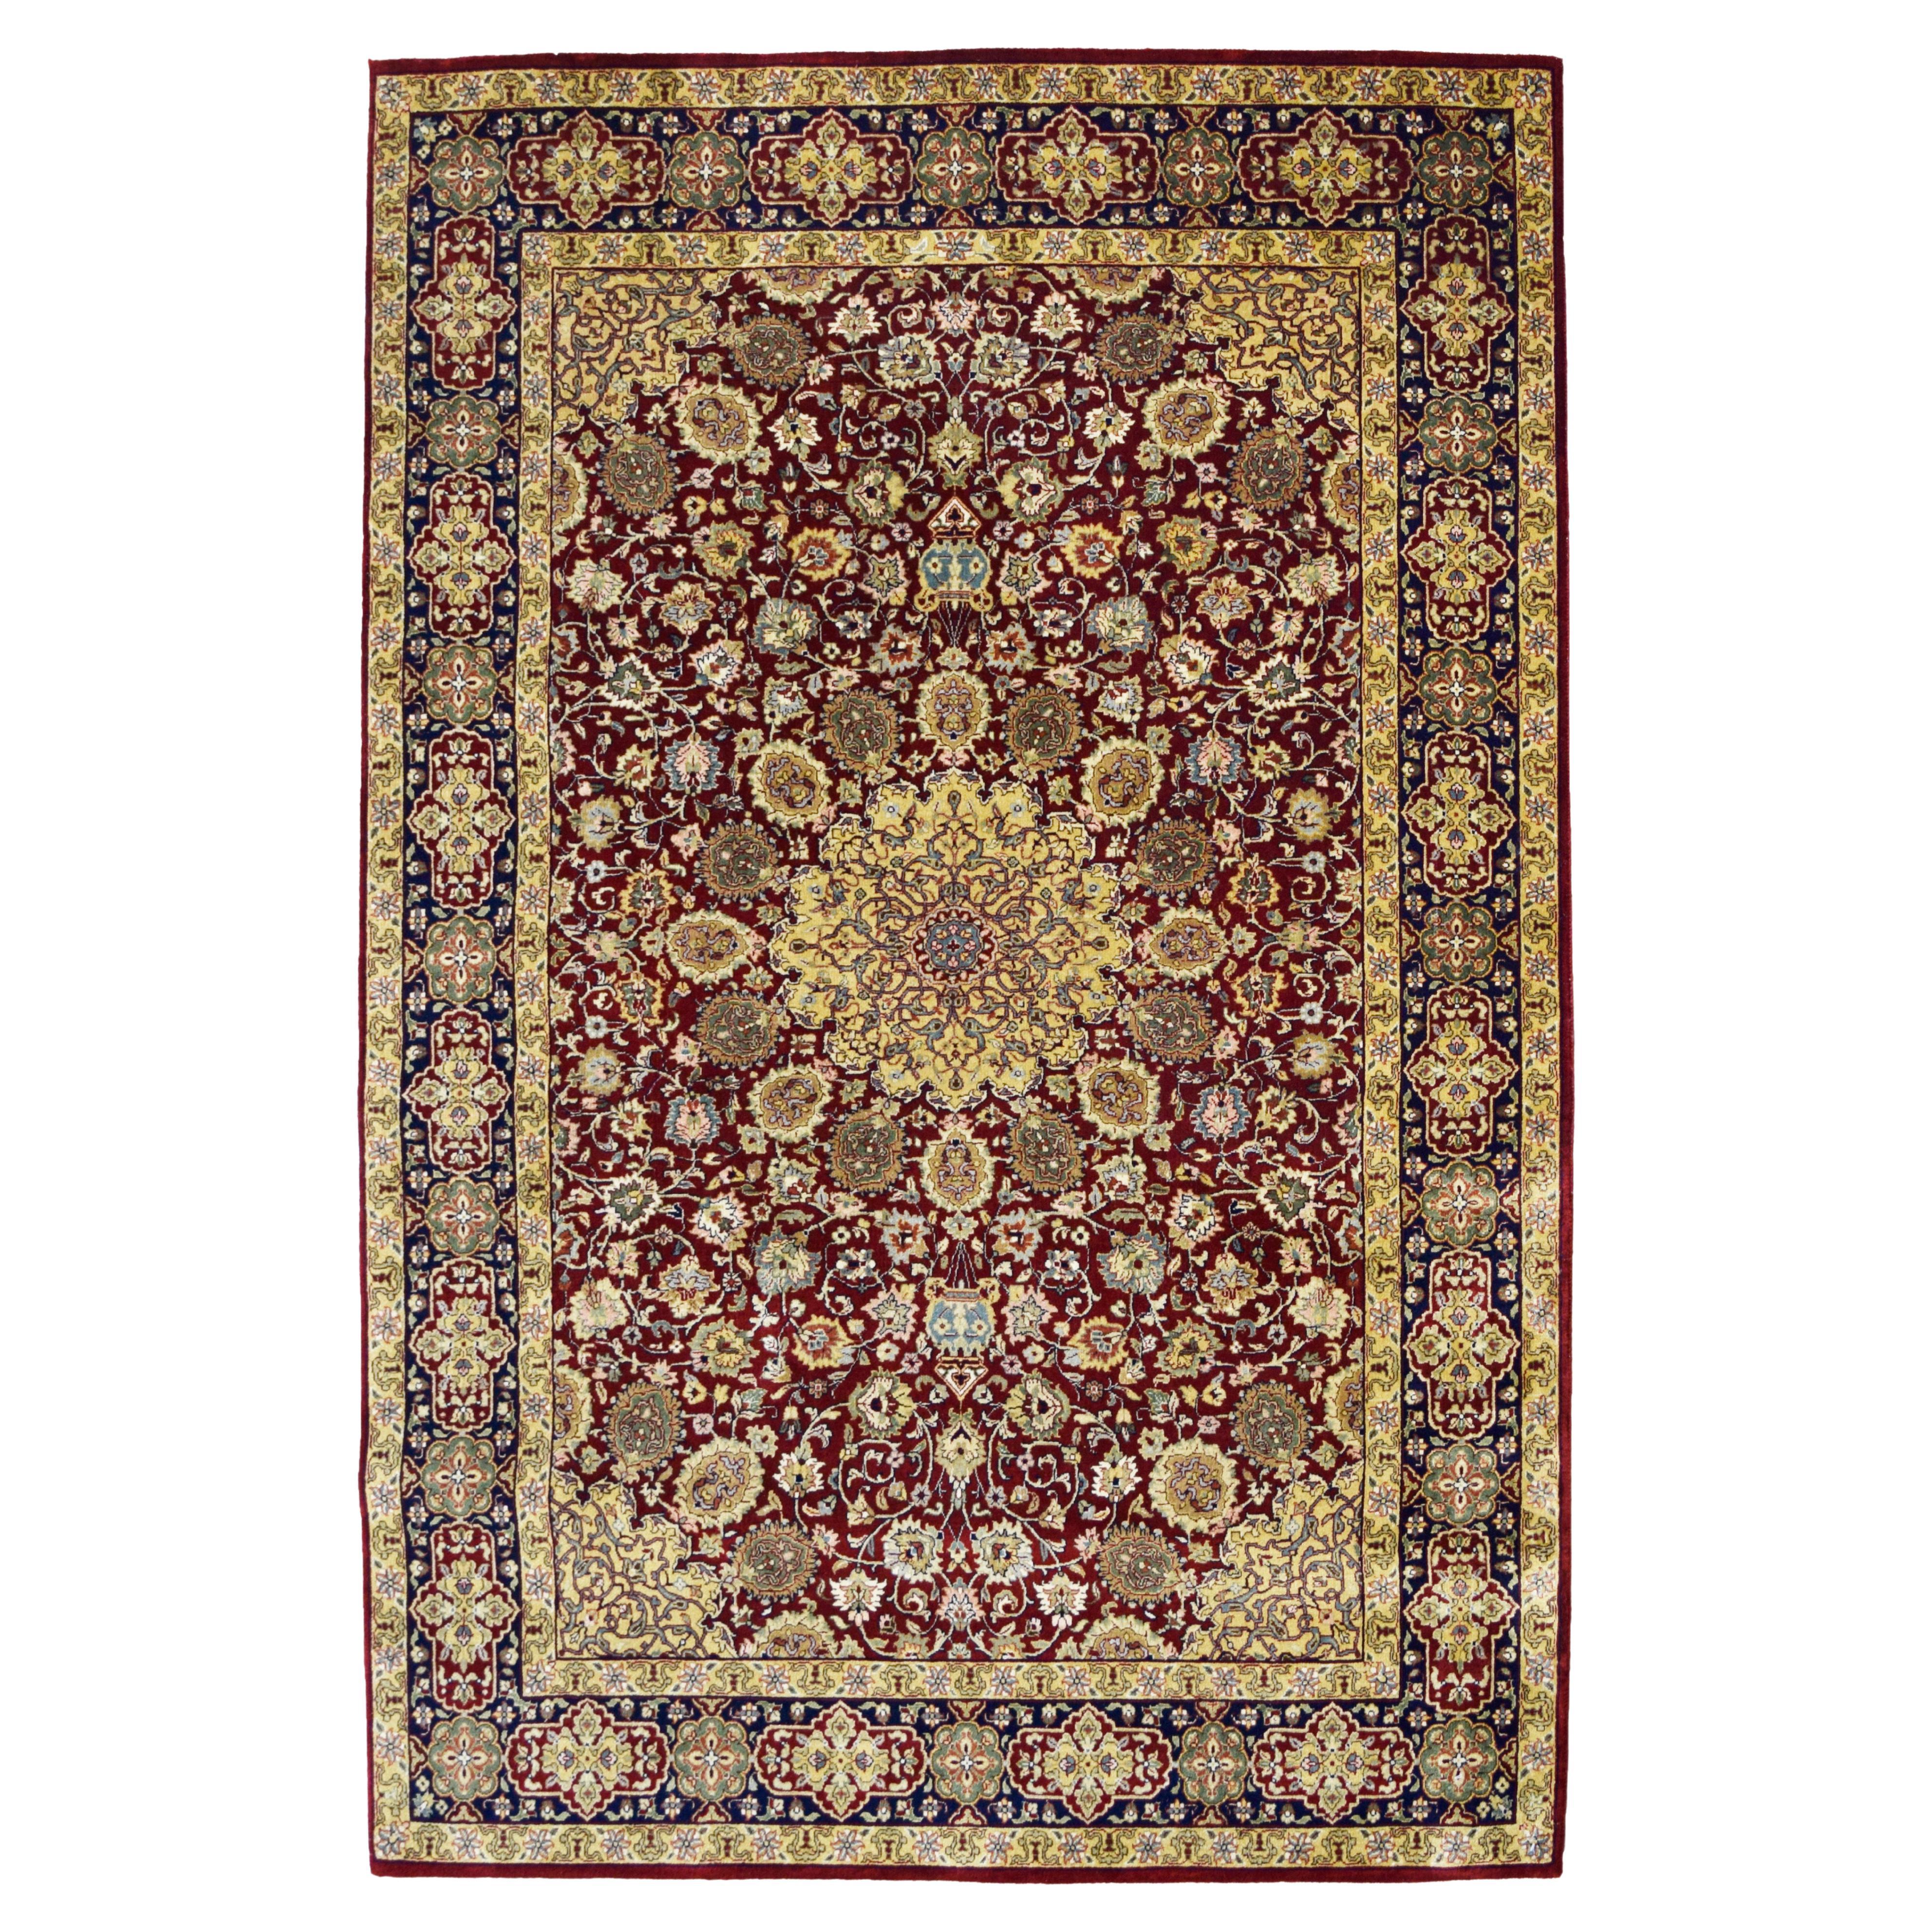 Fine Hand Knotted Tabriz Carpet in Gold Maroon and Cream Wool, 5' x 7'